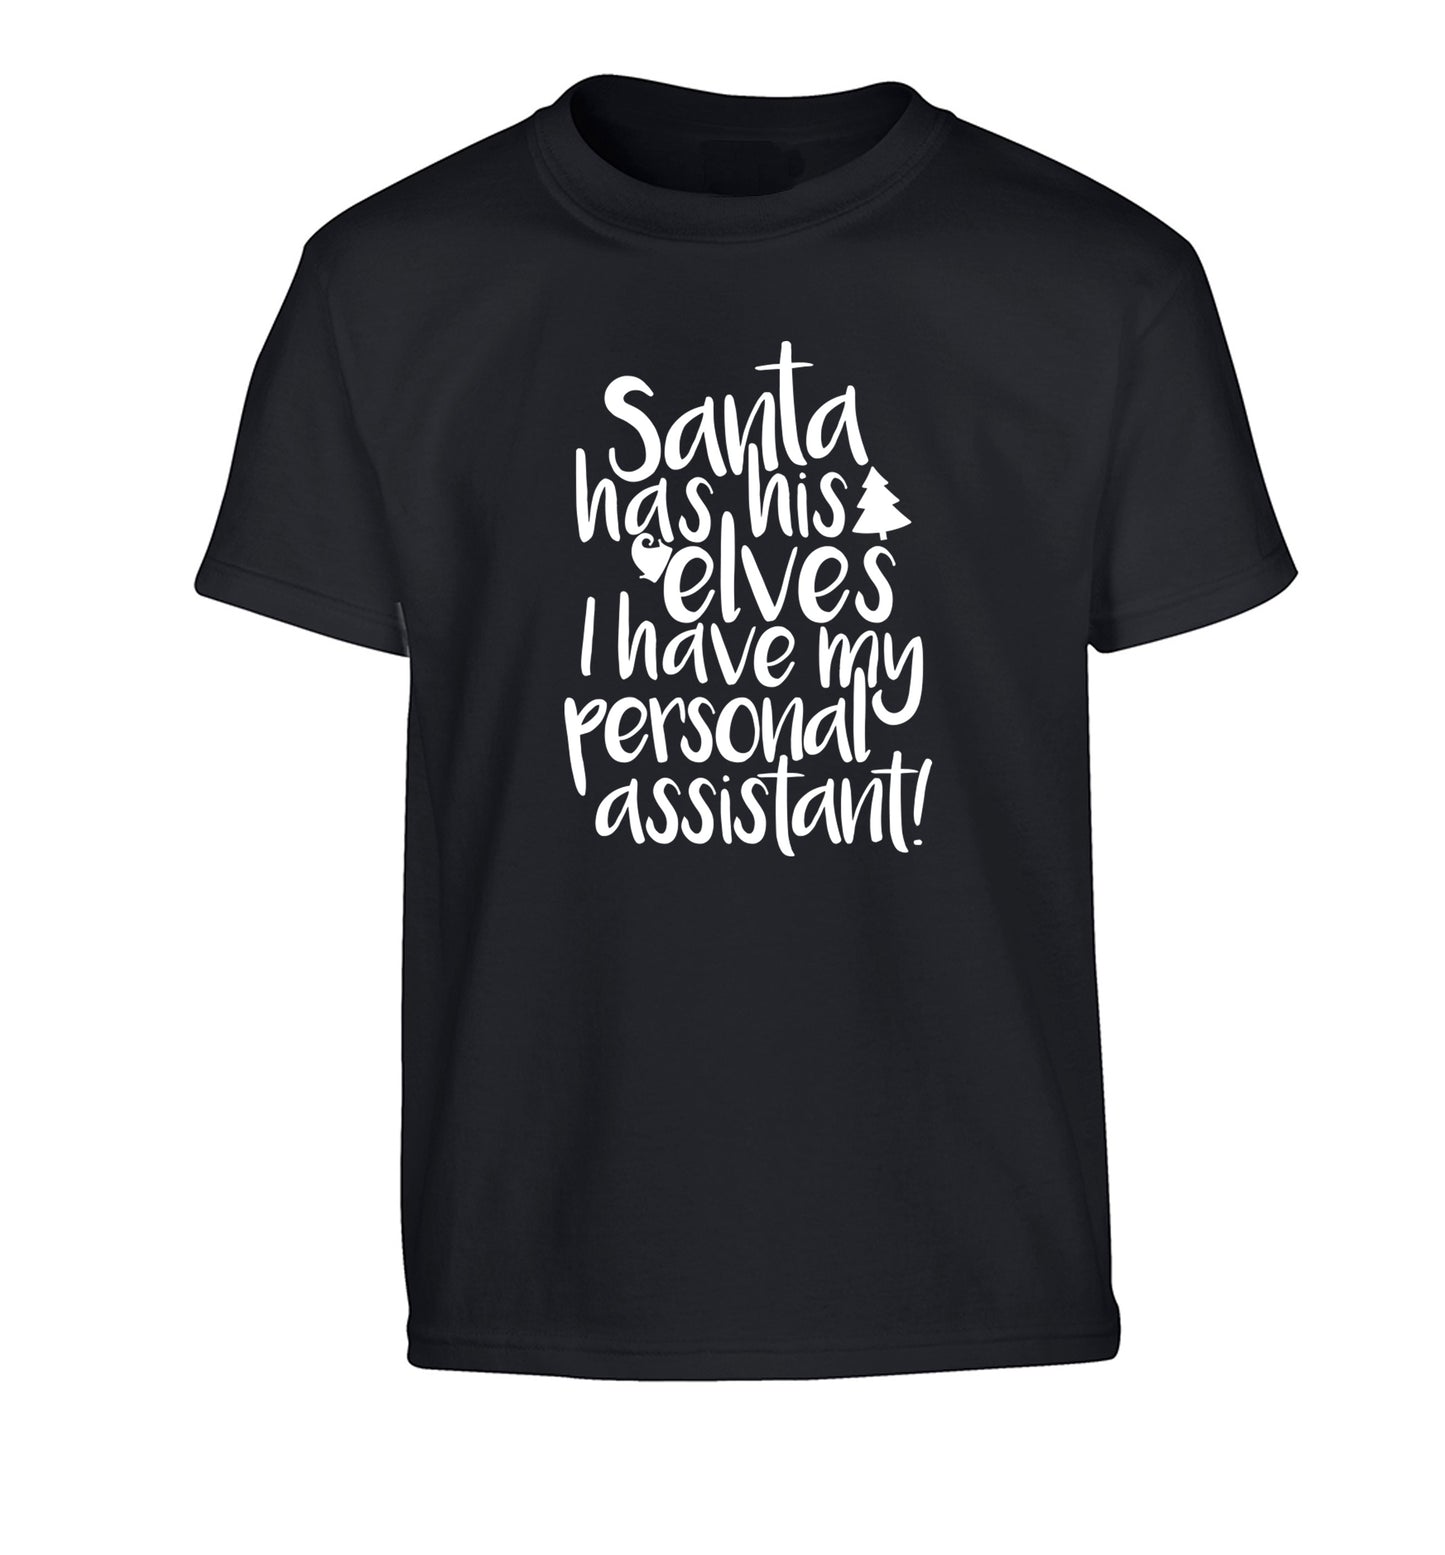 Santa has his elves I have my personal assistant Children's black Tshirt 12-14 Years